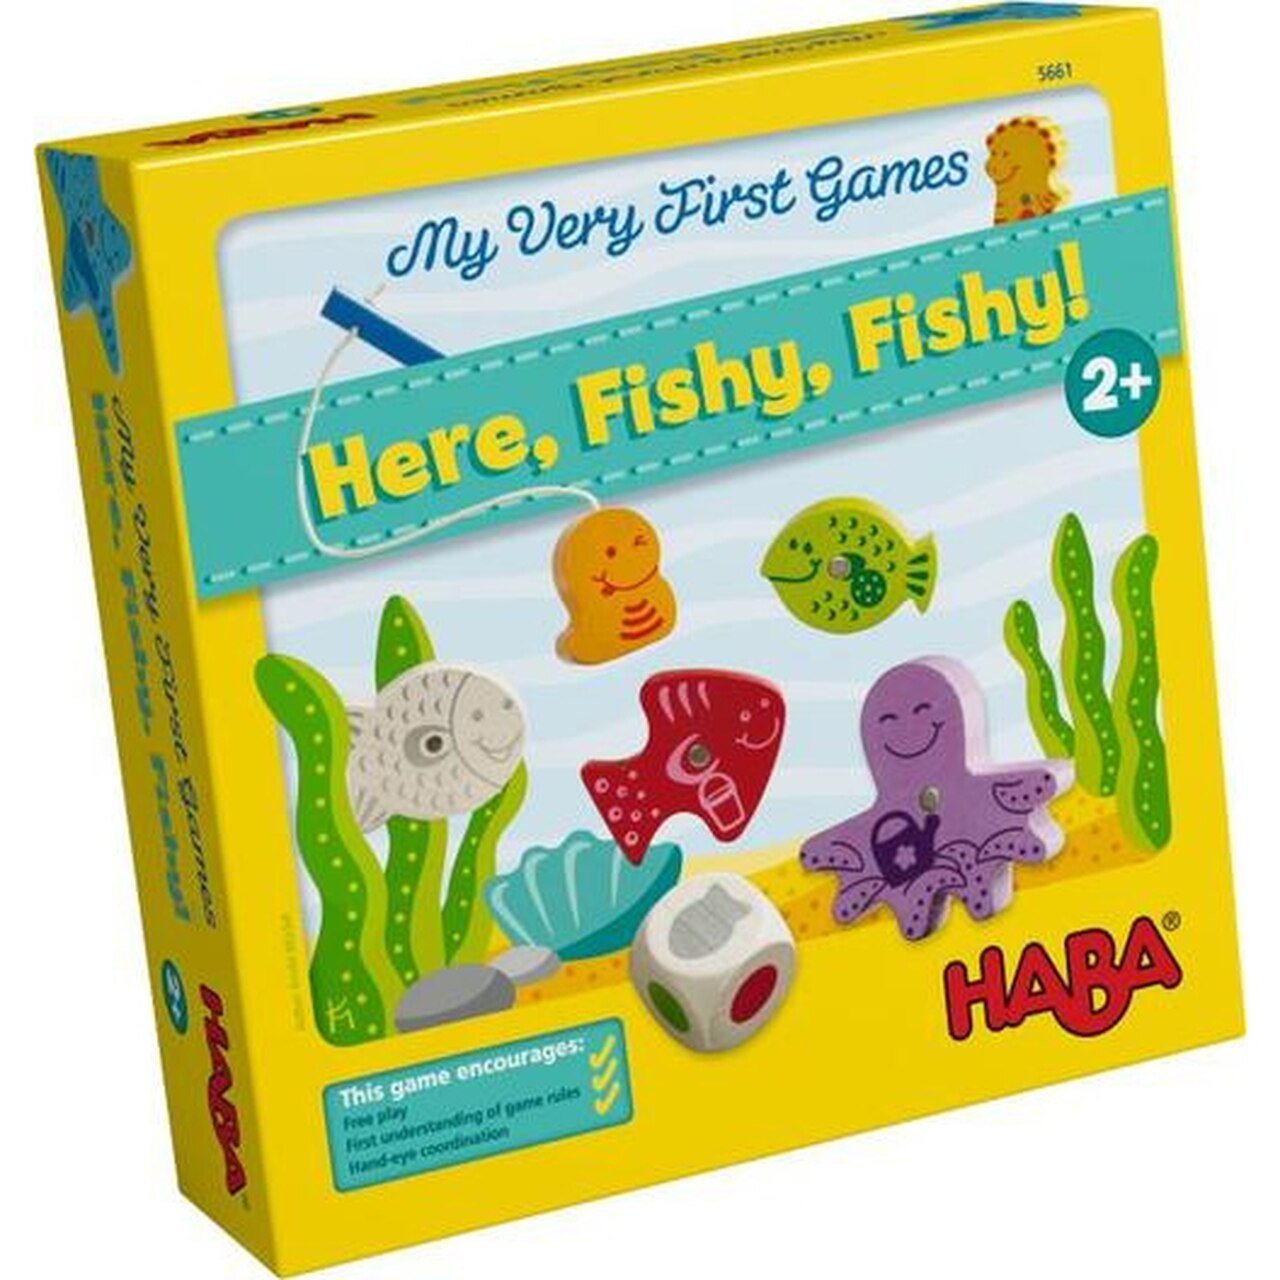 HABA My Very First Games - Here, Fishy, Fishy! - Wood Wood Toys Canada's Favourite Montessori Toy Store